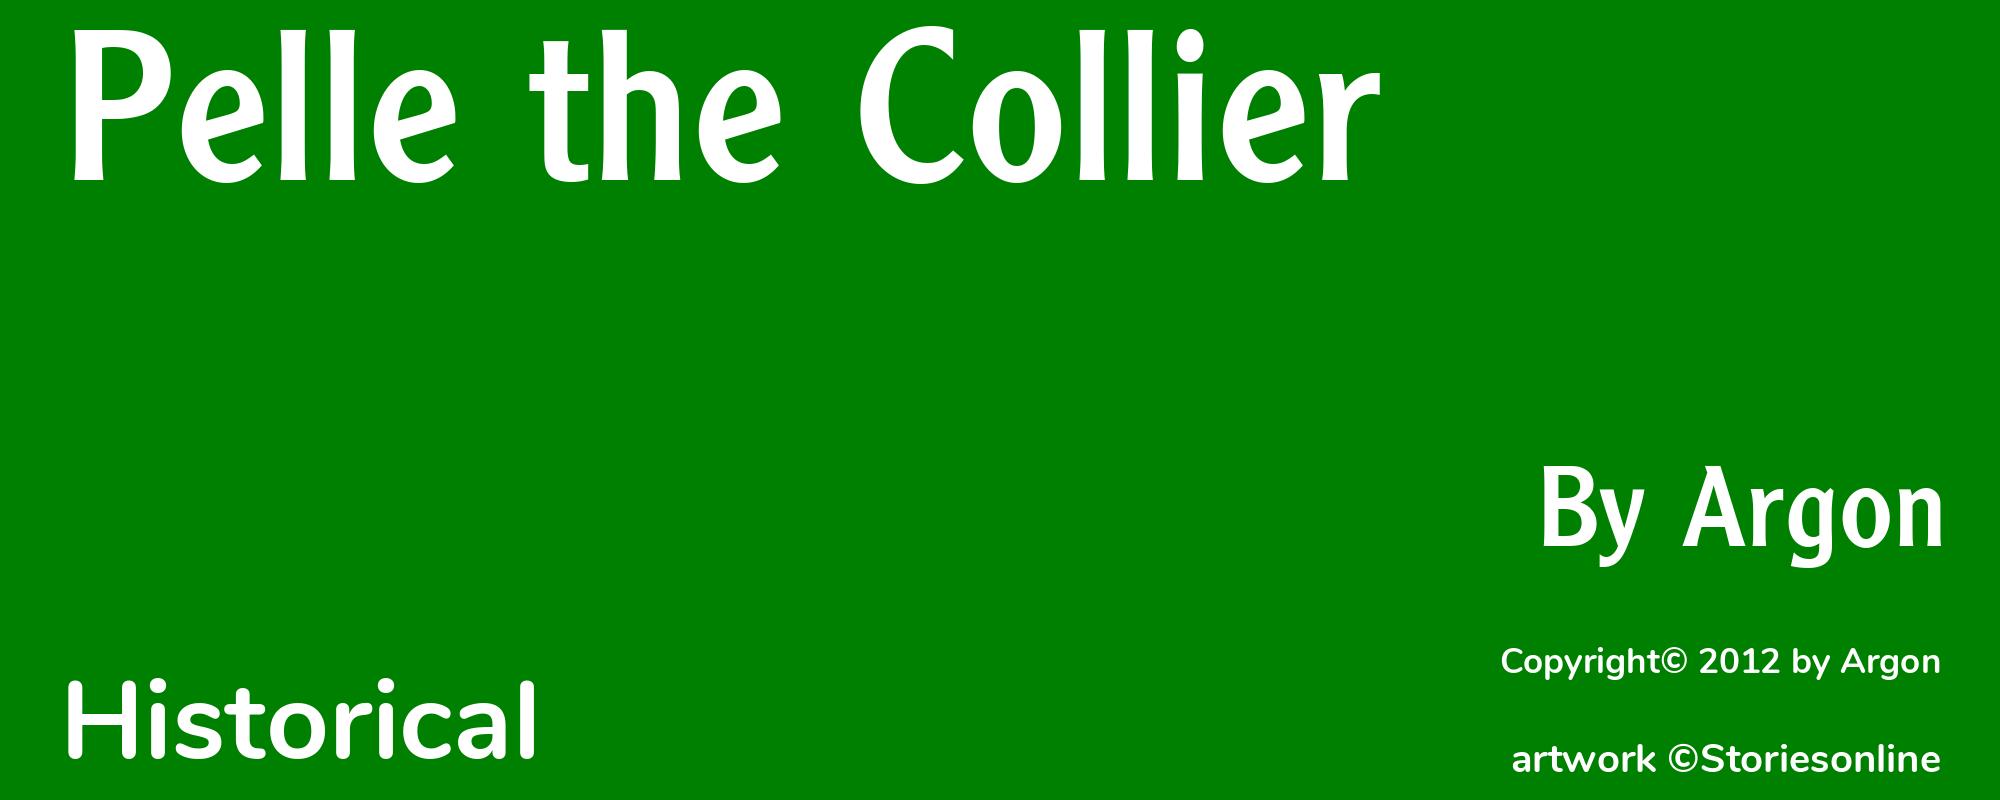 Pelle the Collier - Cover